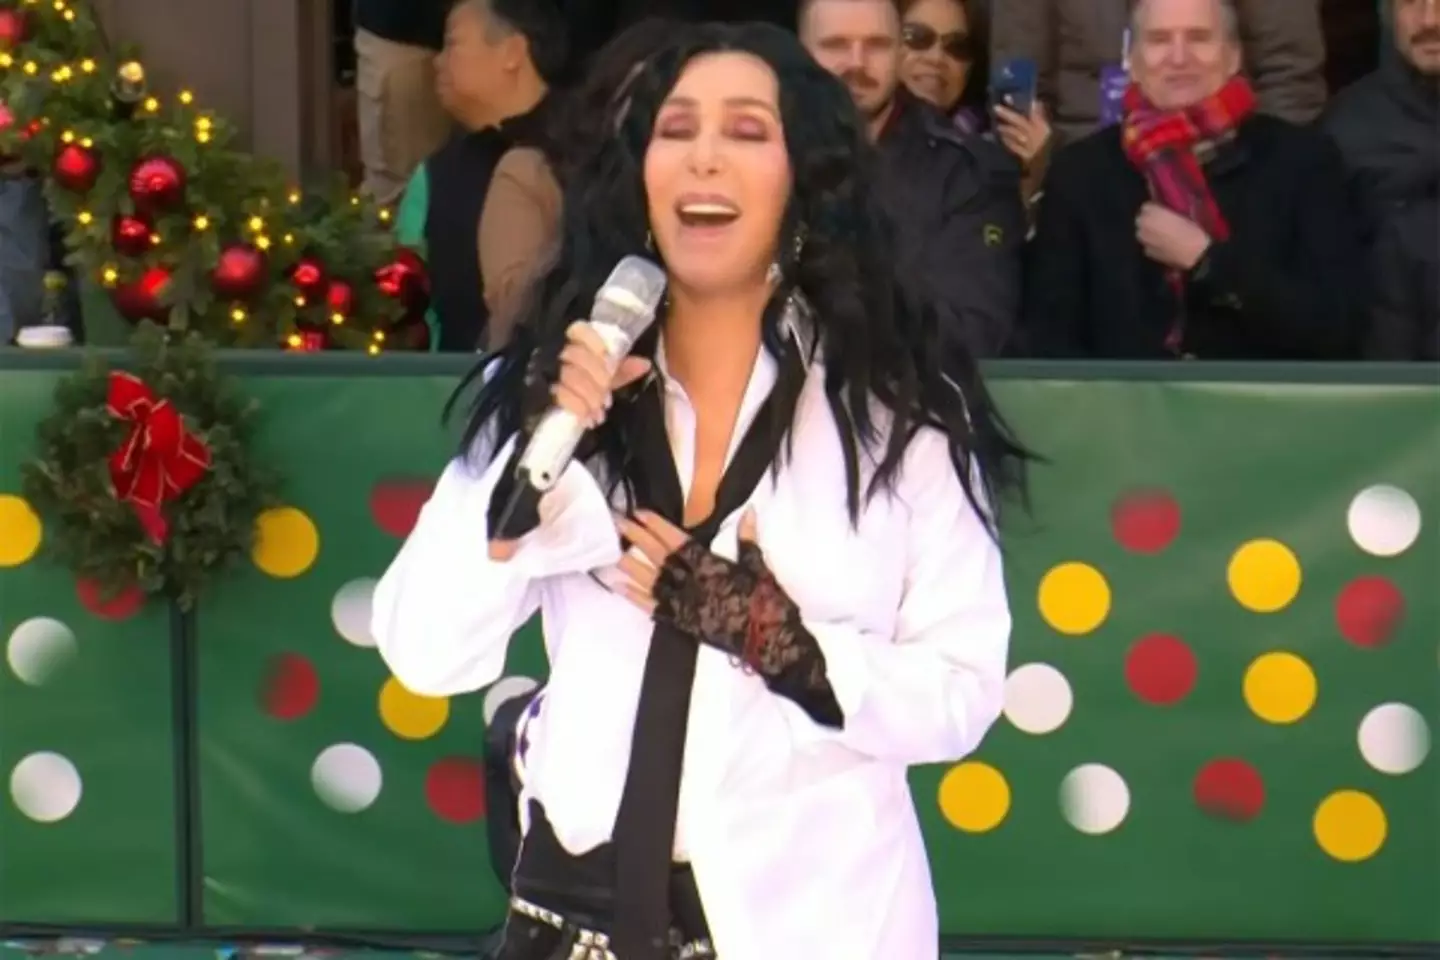 The 'Believe' star sang a festive tune from her new Christmas album.